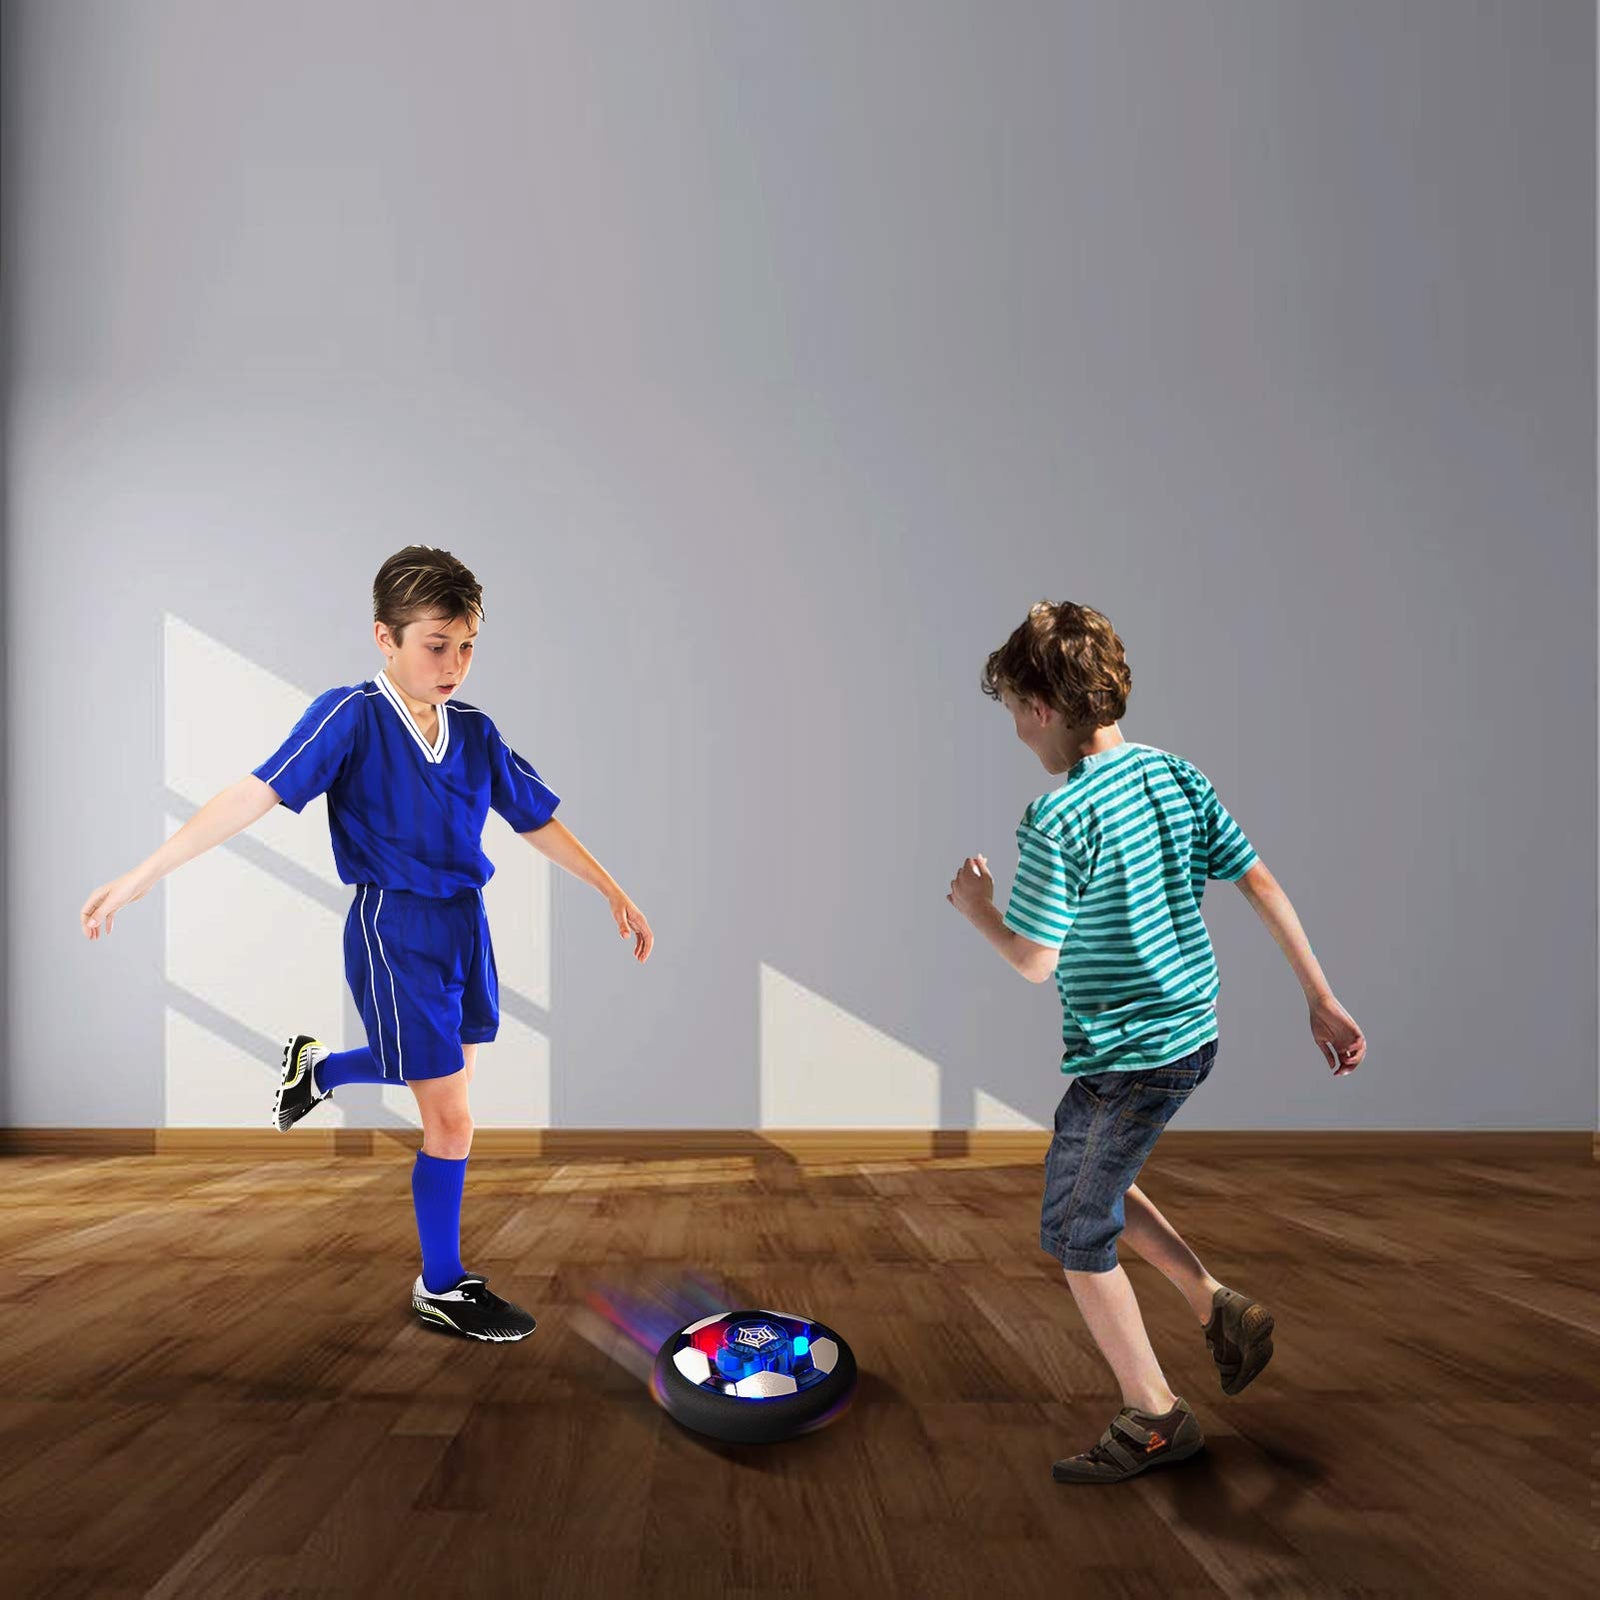 Hover Soccer Ball Boy Toys, Rechargeable Air Soccer Indoor Floating Soccer Ball with LED Light and Upgraded Foam Bumper Perfect Birthday Christmas Gifts for Kids Toddler Girls